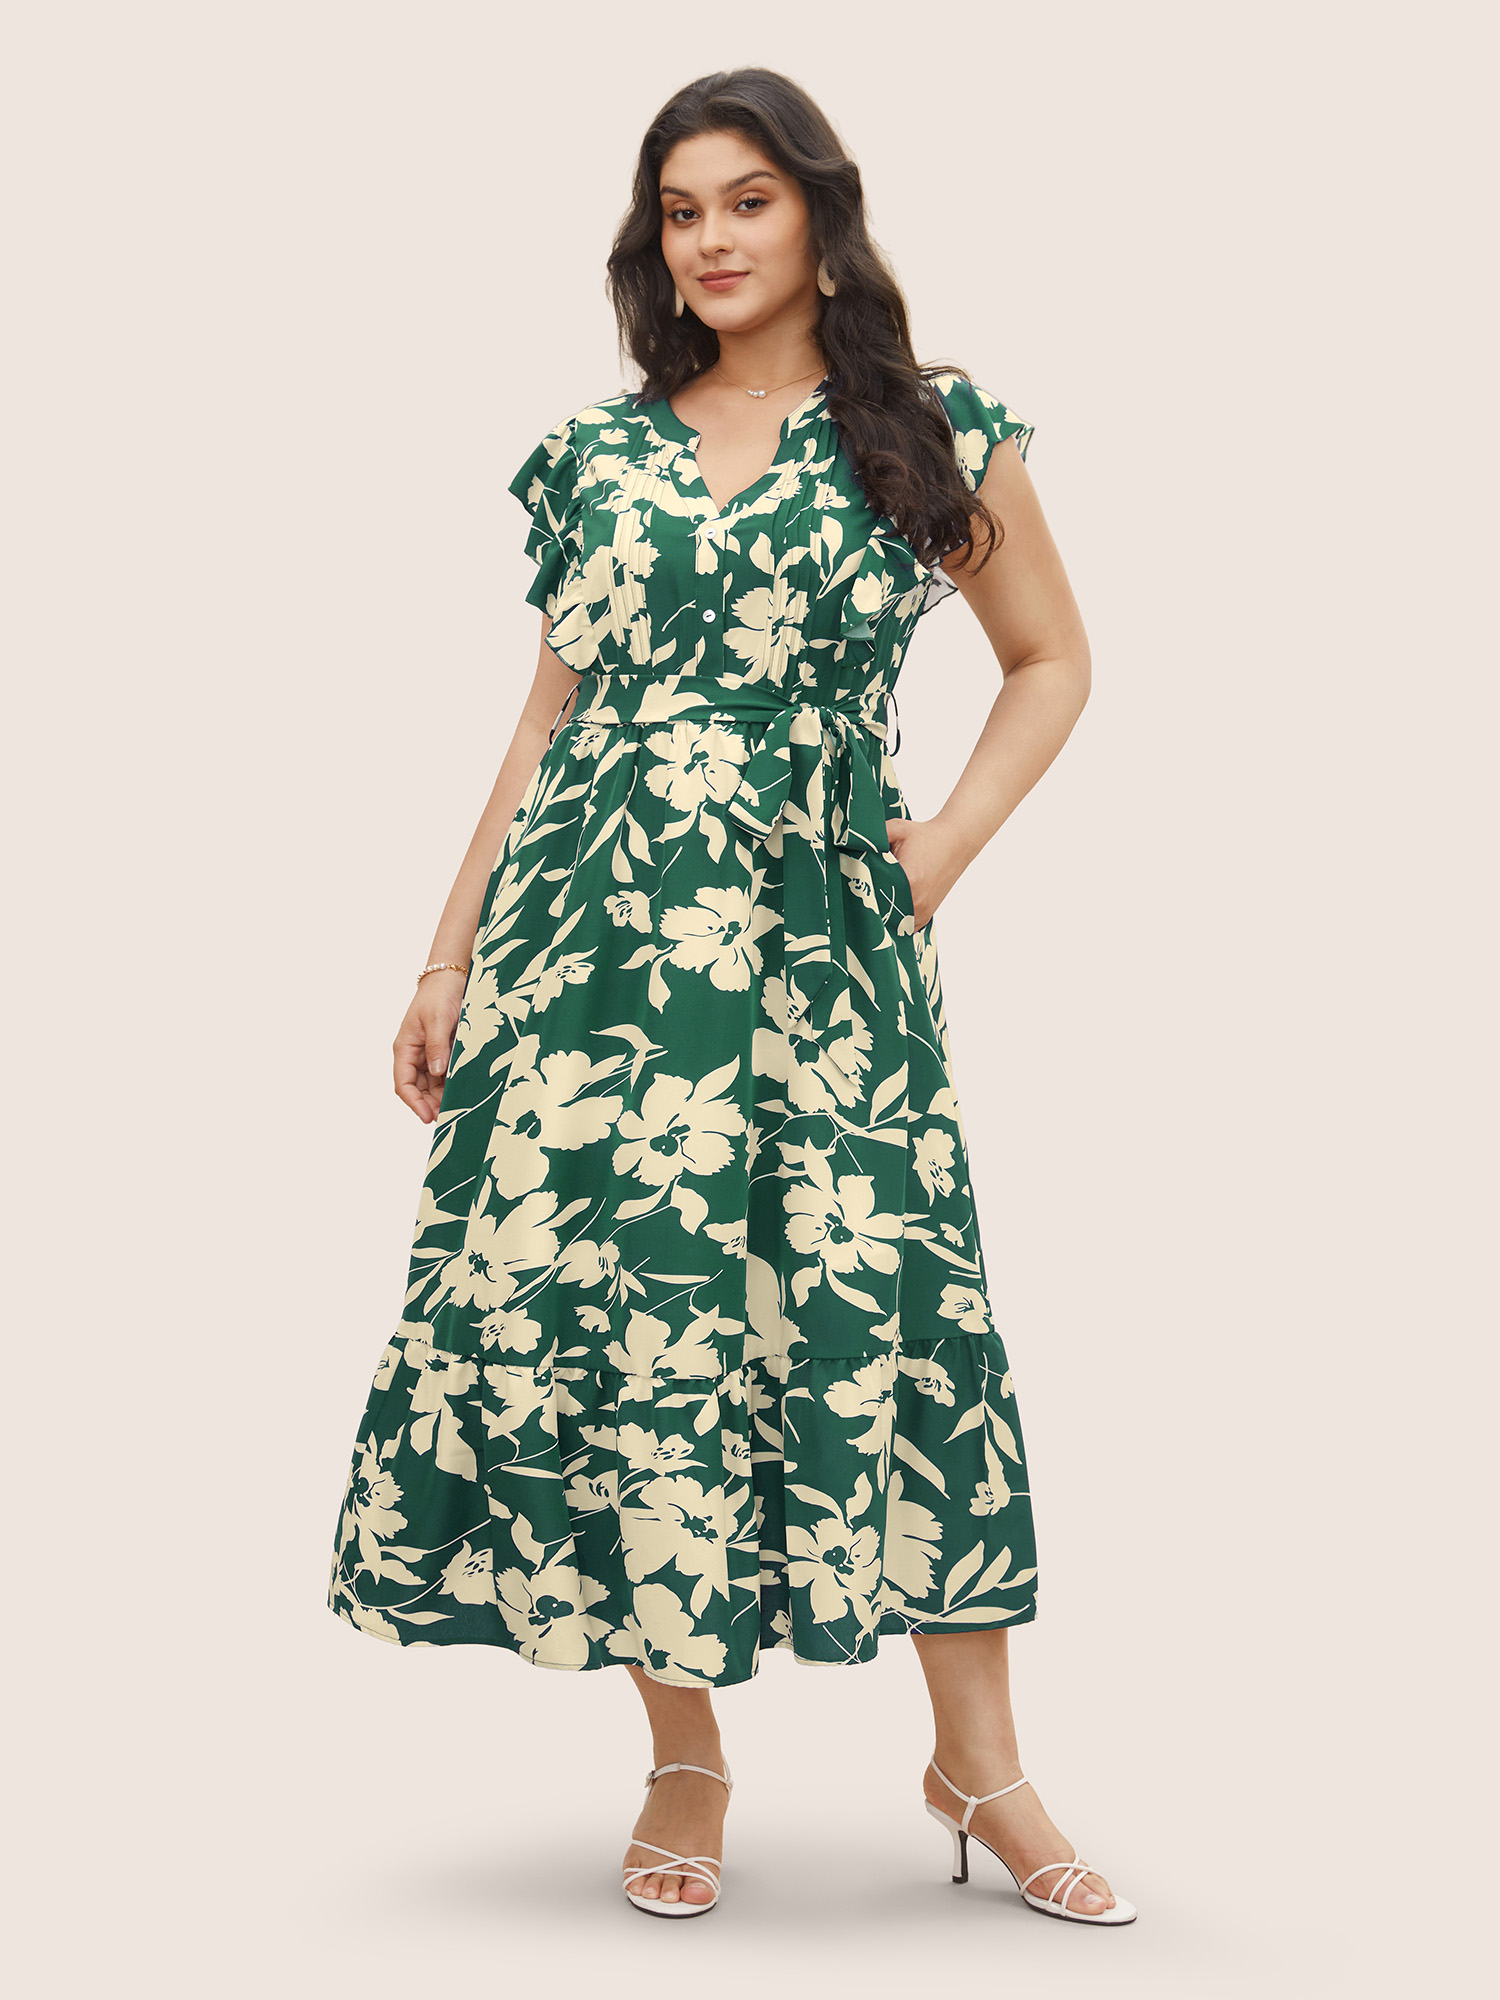 

Plus Size Silhouette Floral Print Ruffle Cap Sleeve Dress Emerald Women Belted Notched collar Cap Sleeve Curvy Midi Dress BloomChic